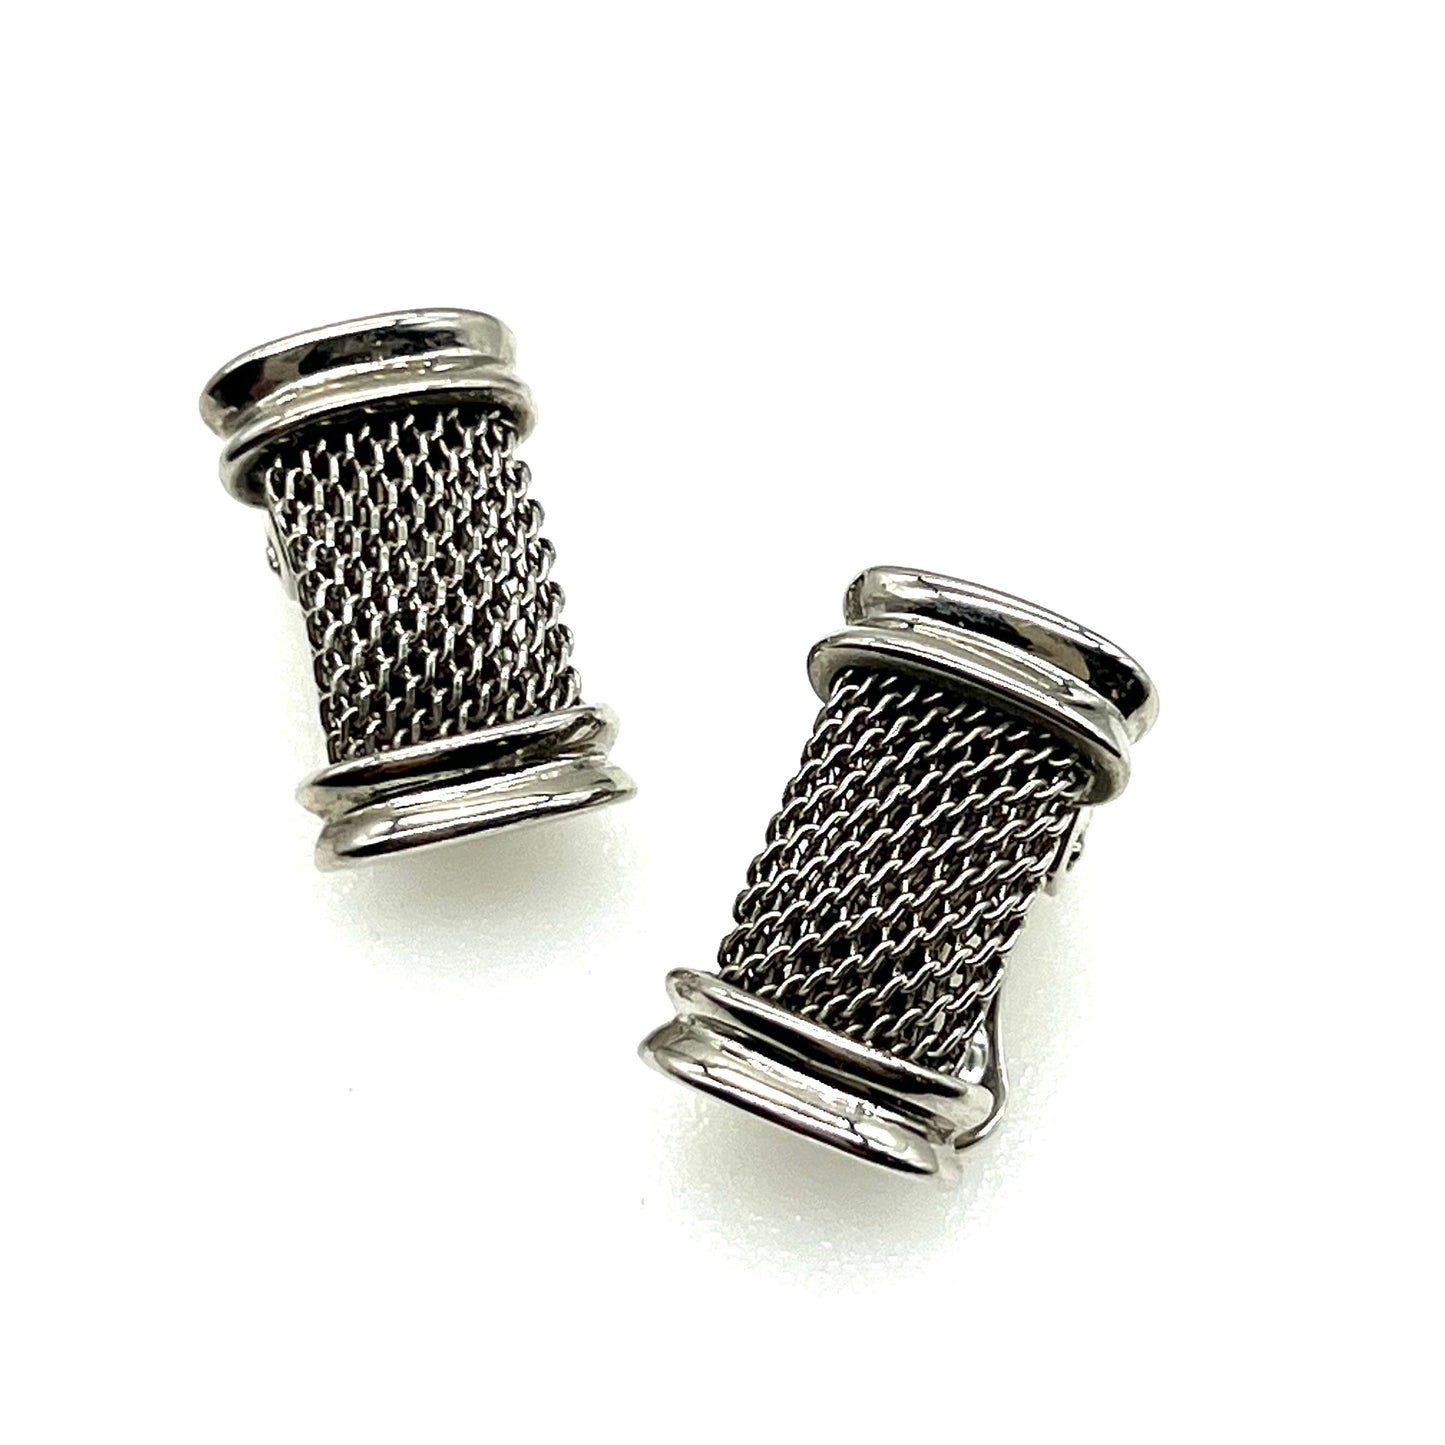 Unsigned Silver Tone Mesh Clip On Earrings